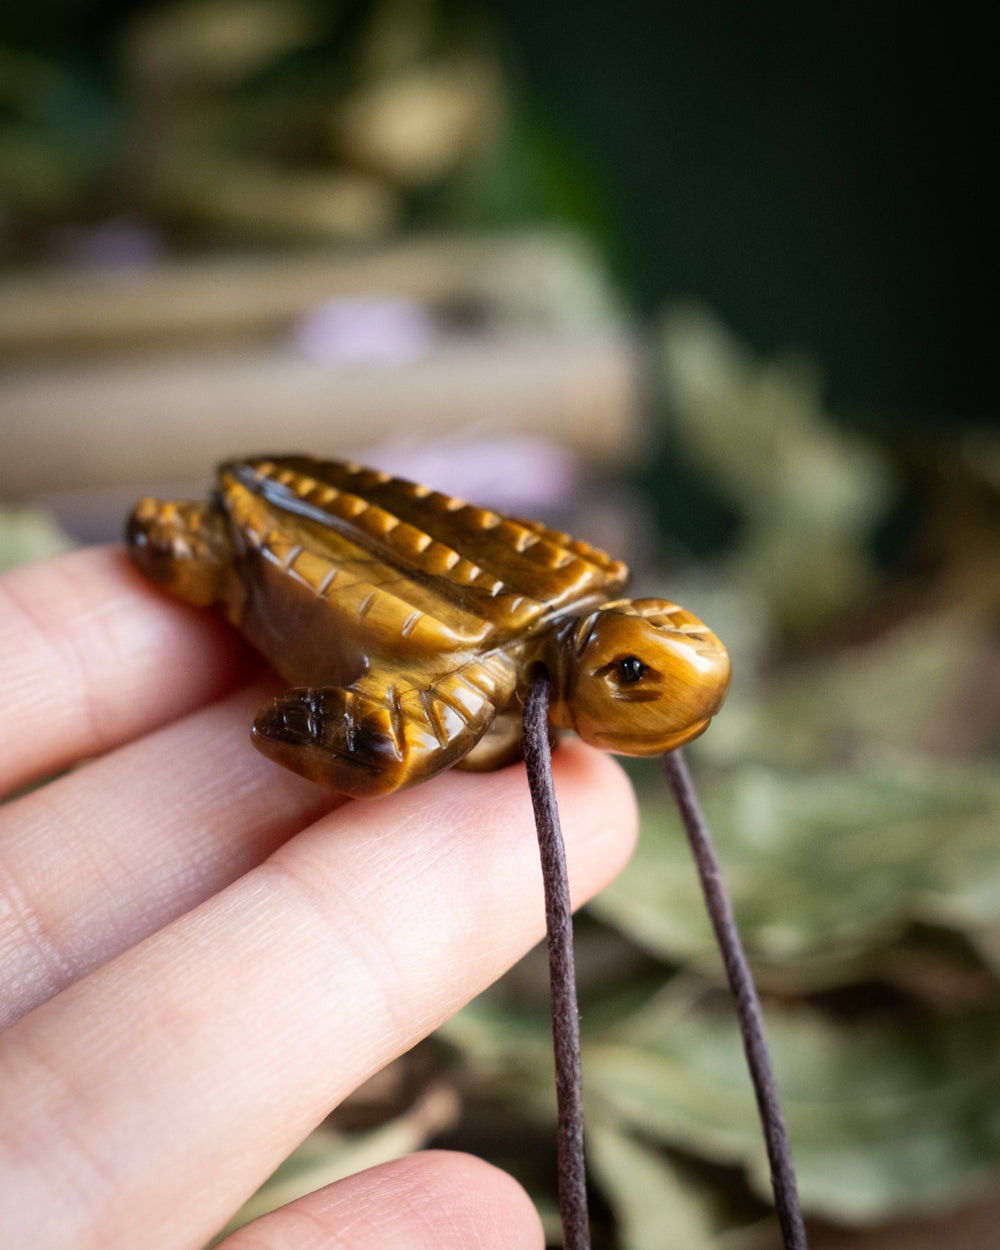 Tiger's Eye Hand Carved Leatherback Sea Turtle Necklace - The Healing Pear